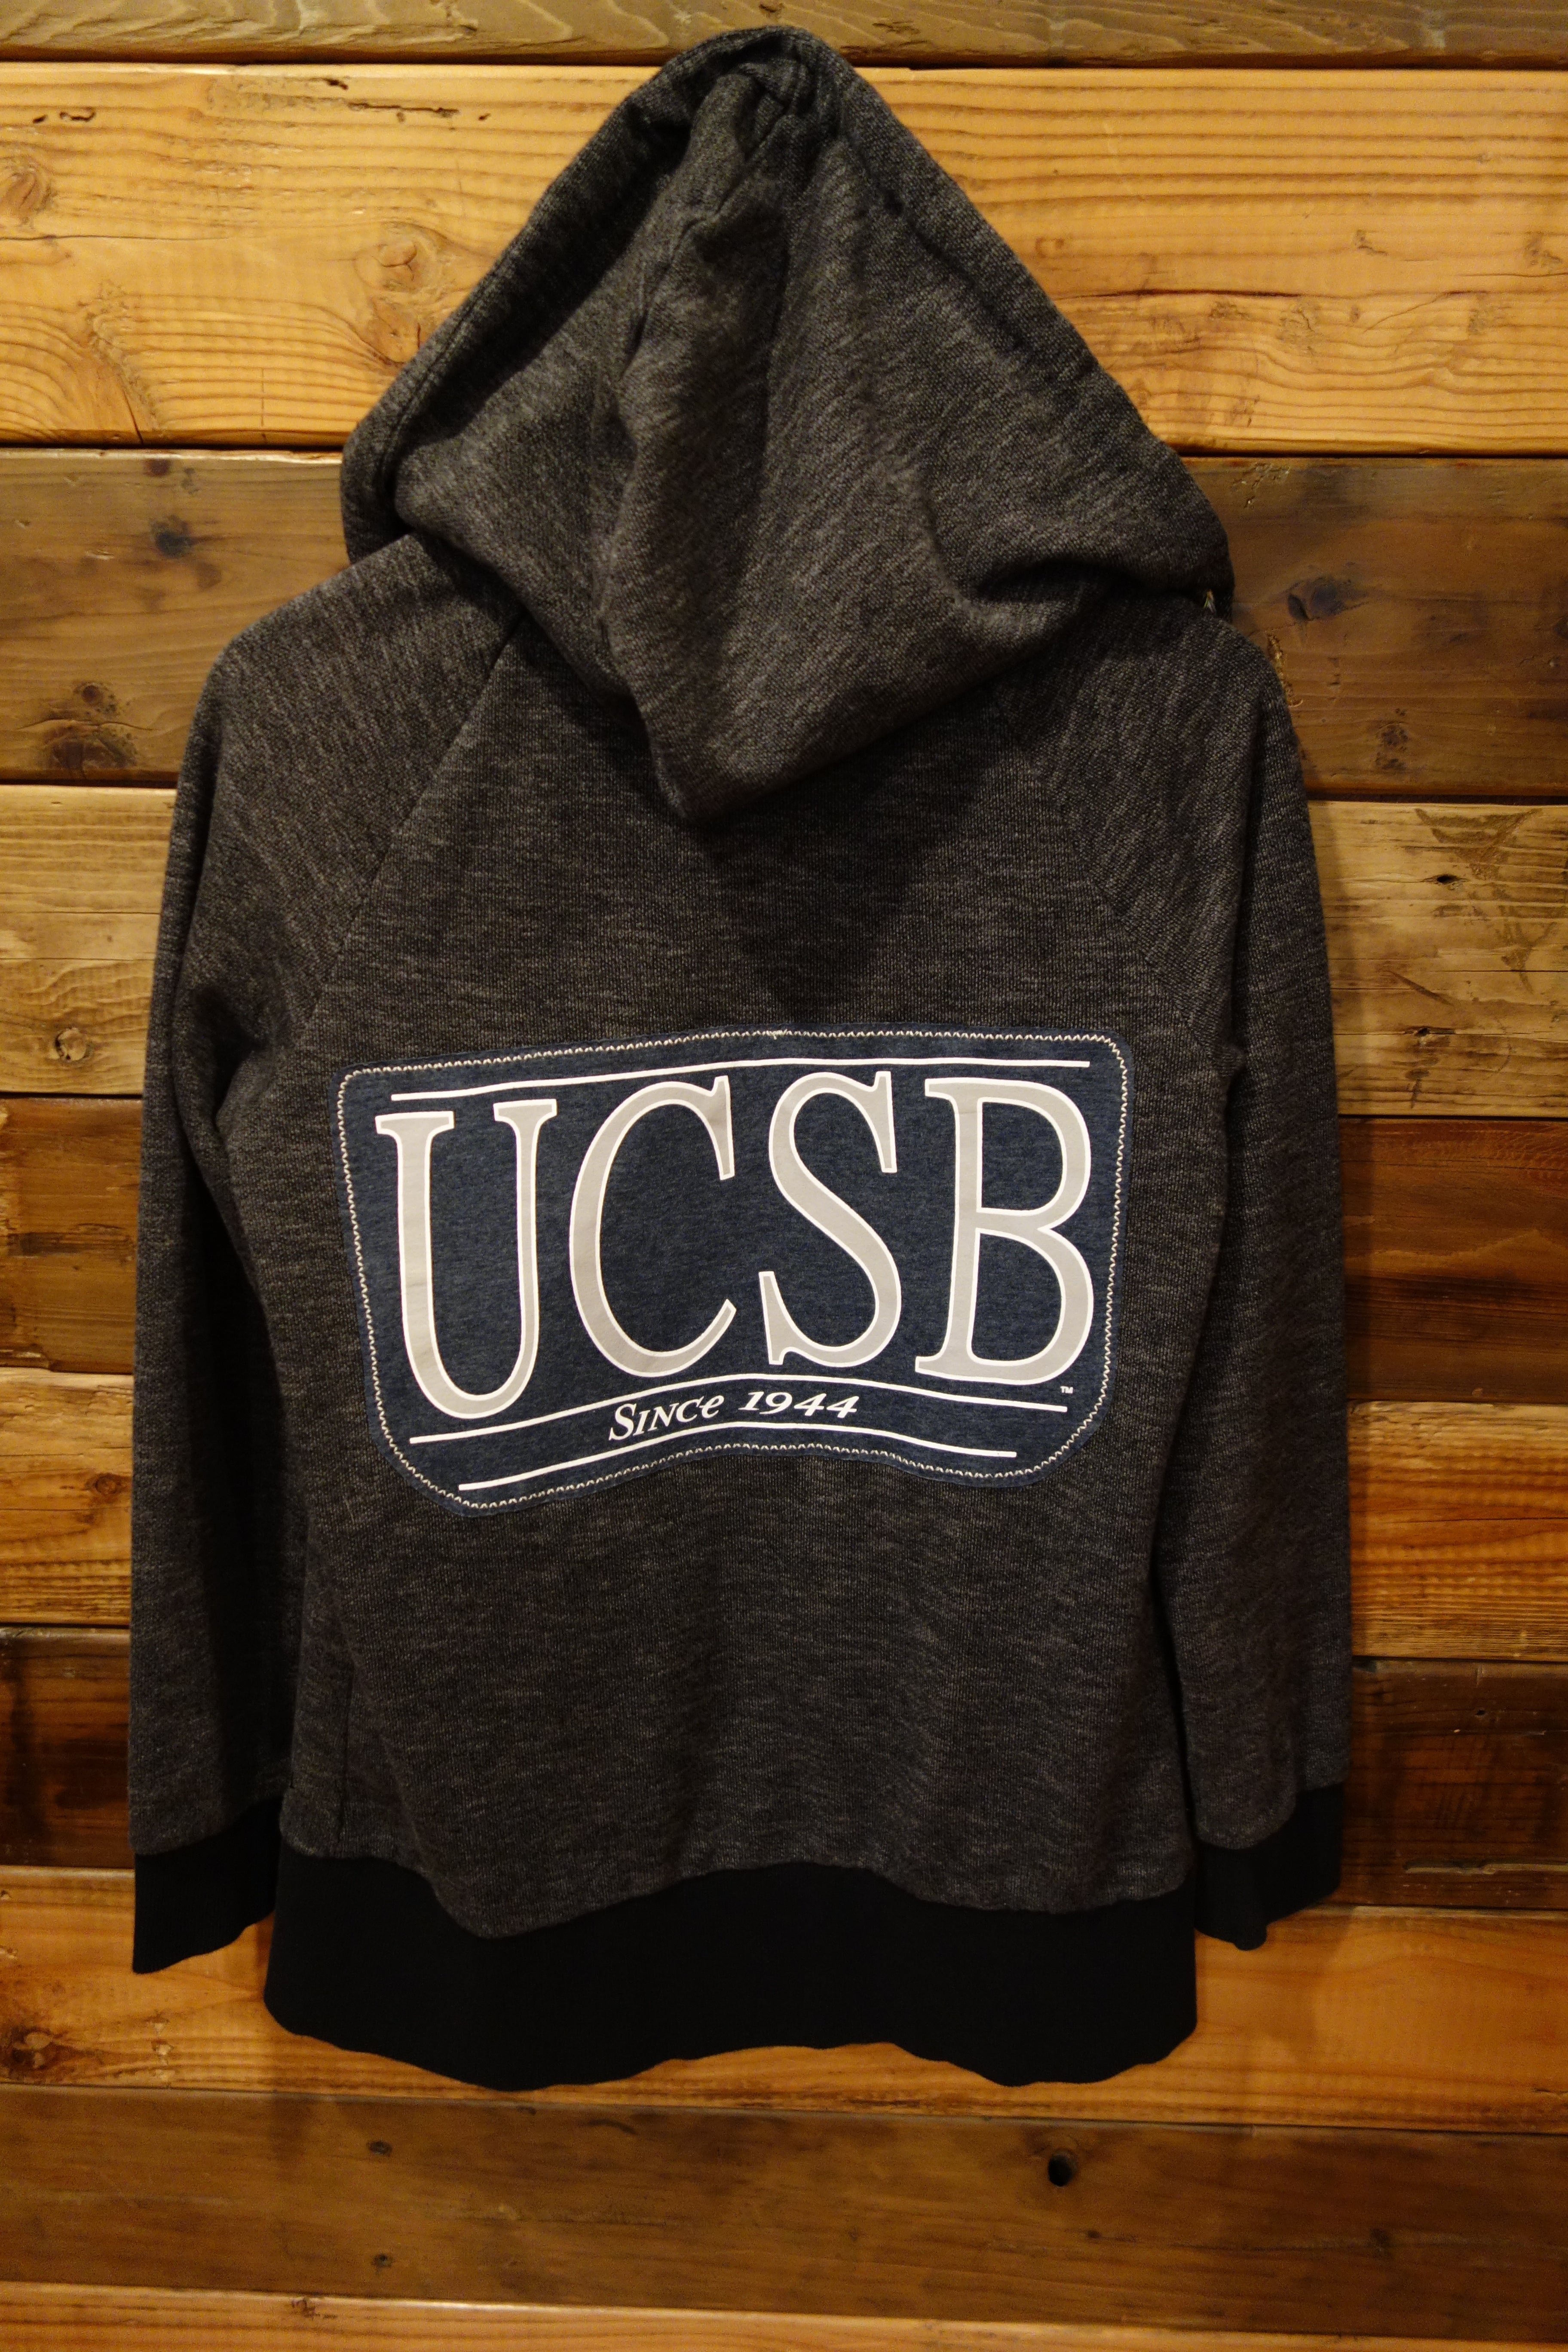 UCSB Surfer Girl (Women's Size - M)